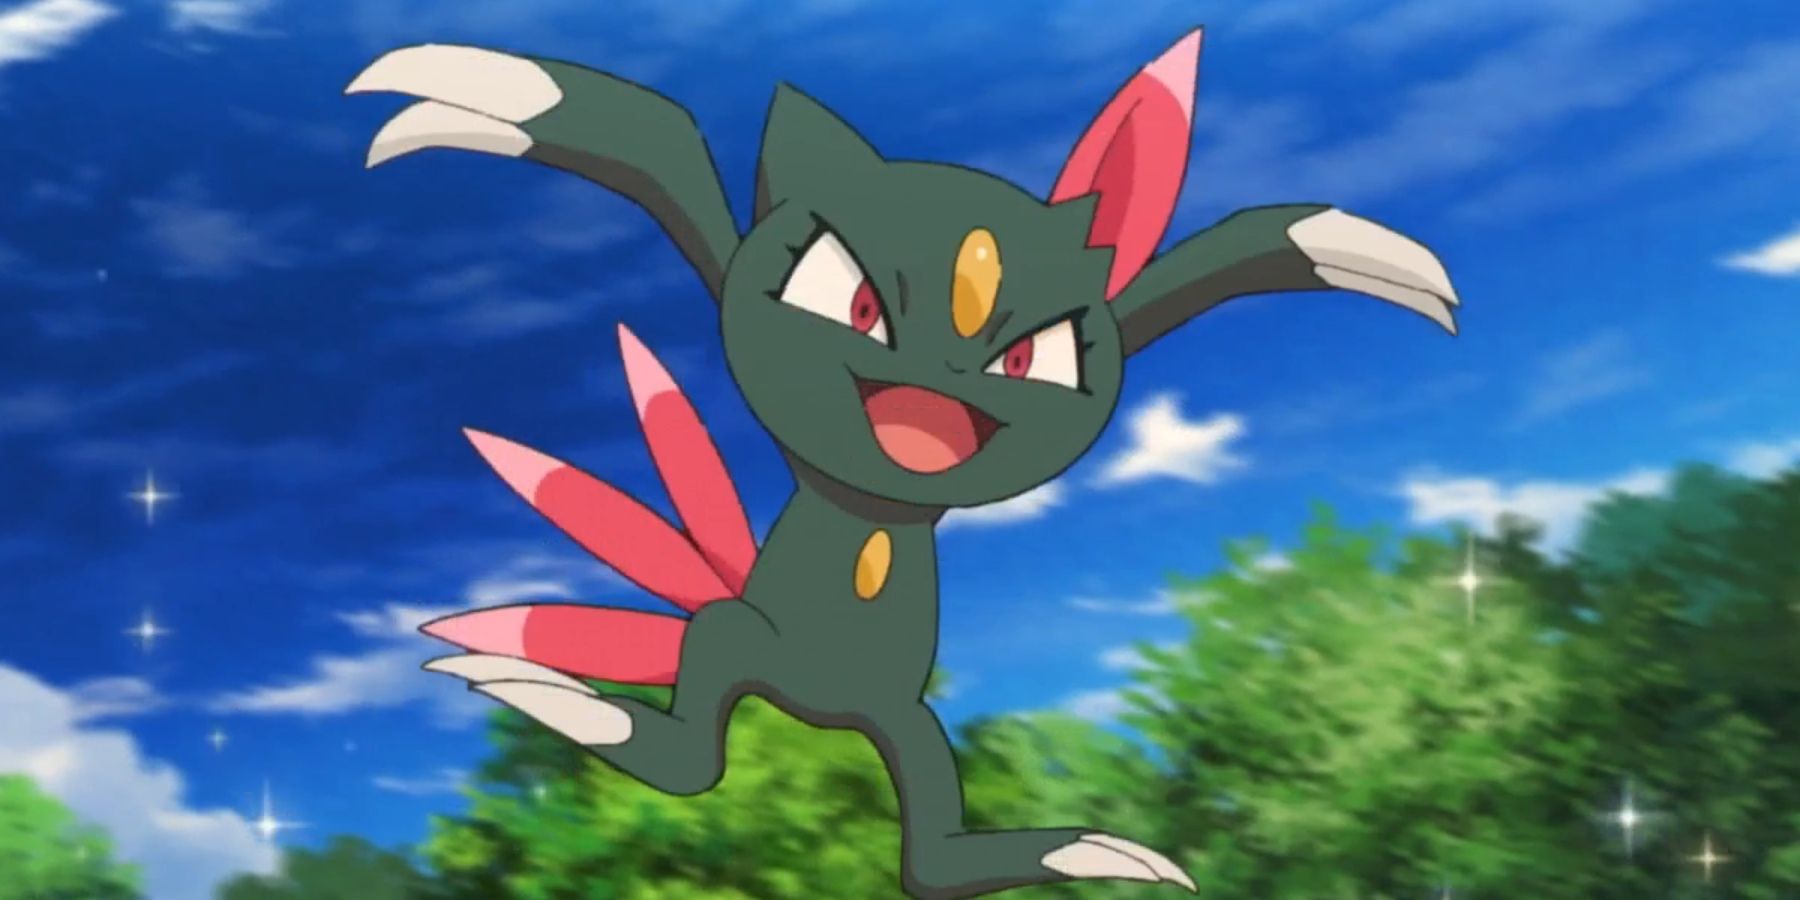 Sneasel jumps out into the air by some trees